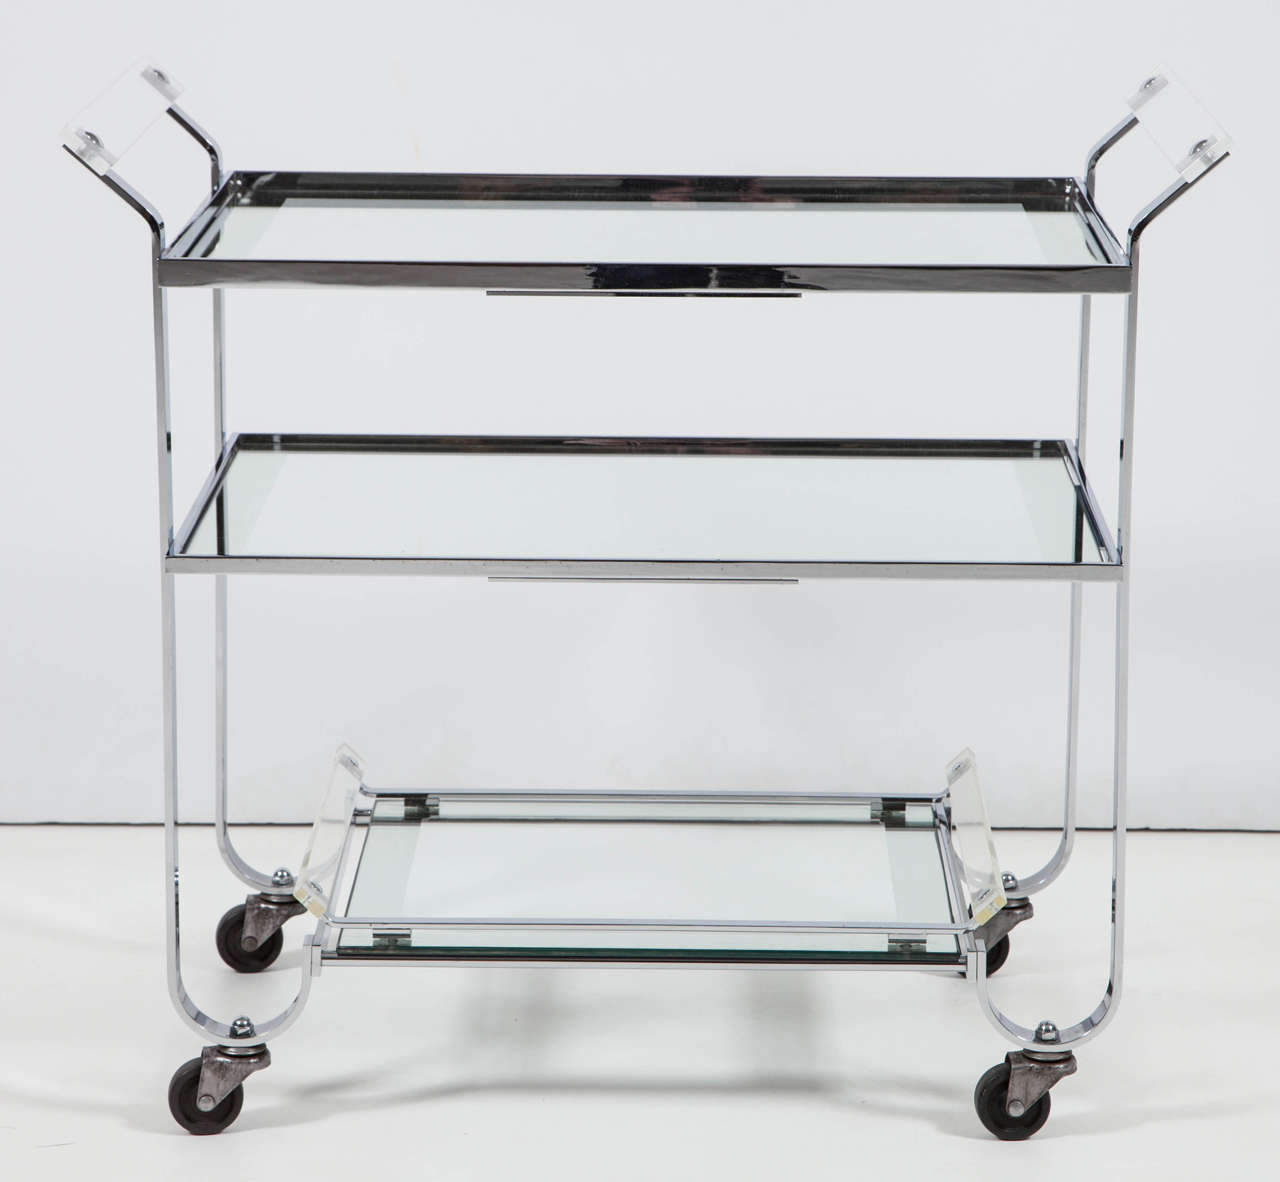 Decorative chrome bar cart, C 1950, Italy. 3 shelves, the bottom is a tray. Lucite handles. The bar cart is 24